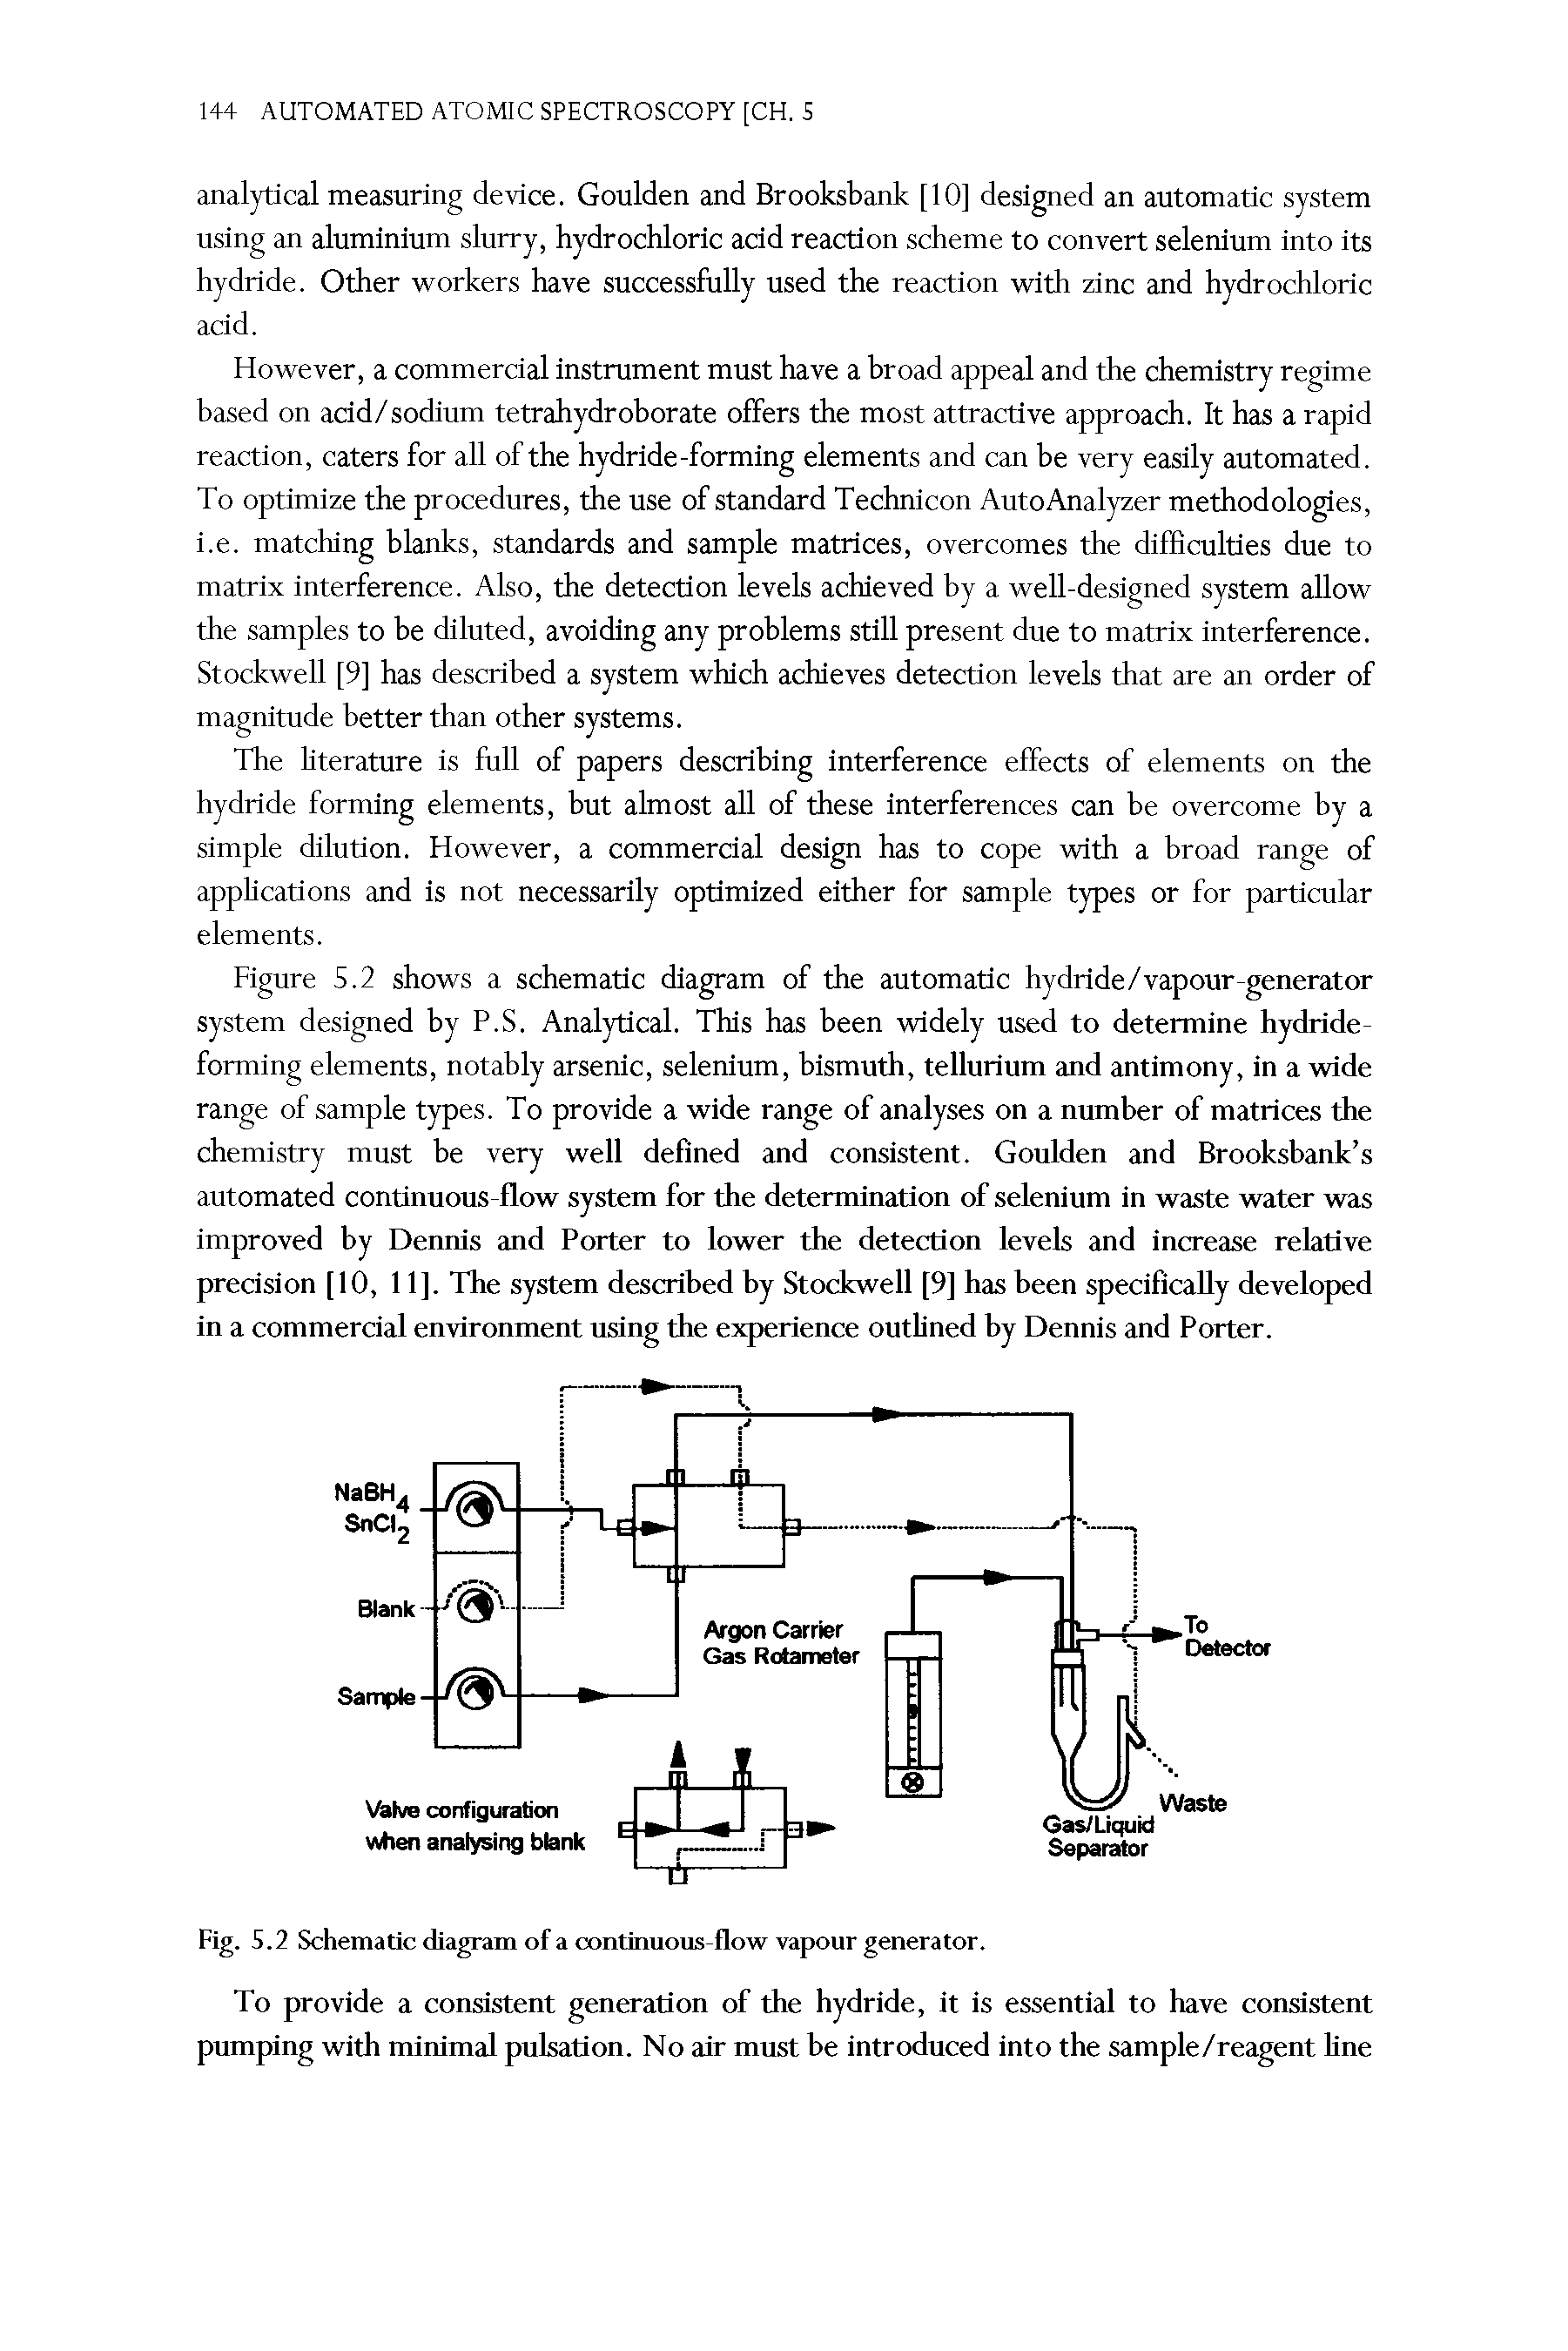 Figure S.2 shows a schematic diagram of the automatic hydride/vapour-generator system designed by P.S. Analytical. This has been widely used to determine hydrideforming elements, notably arsenic, selenium, bismuth, tellurium and antimony, in a wide range of sample types. To provide a wide range of analyses on a number of matrices the chemistry must be very well defined and consistent. Goulden and Brooksbank s automated continuous-flow system for the determination of selenium in waste water was improved by Dennis and Porter to lower the detection levels and increase relative precision [10, 11]. The system described by Stockwell [9] has been specifically developed in a commercial environment using the experience outlined by Dennis and Porter.